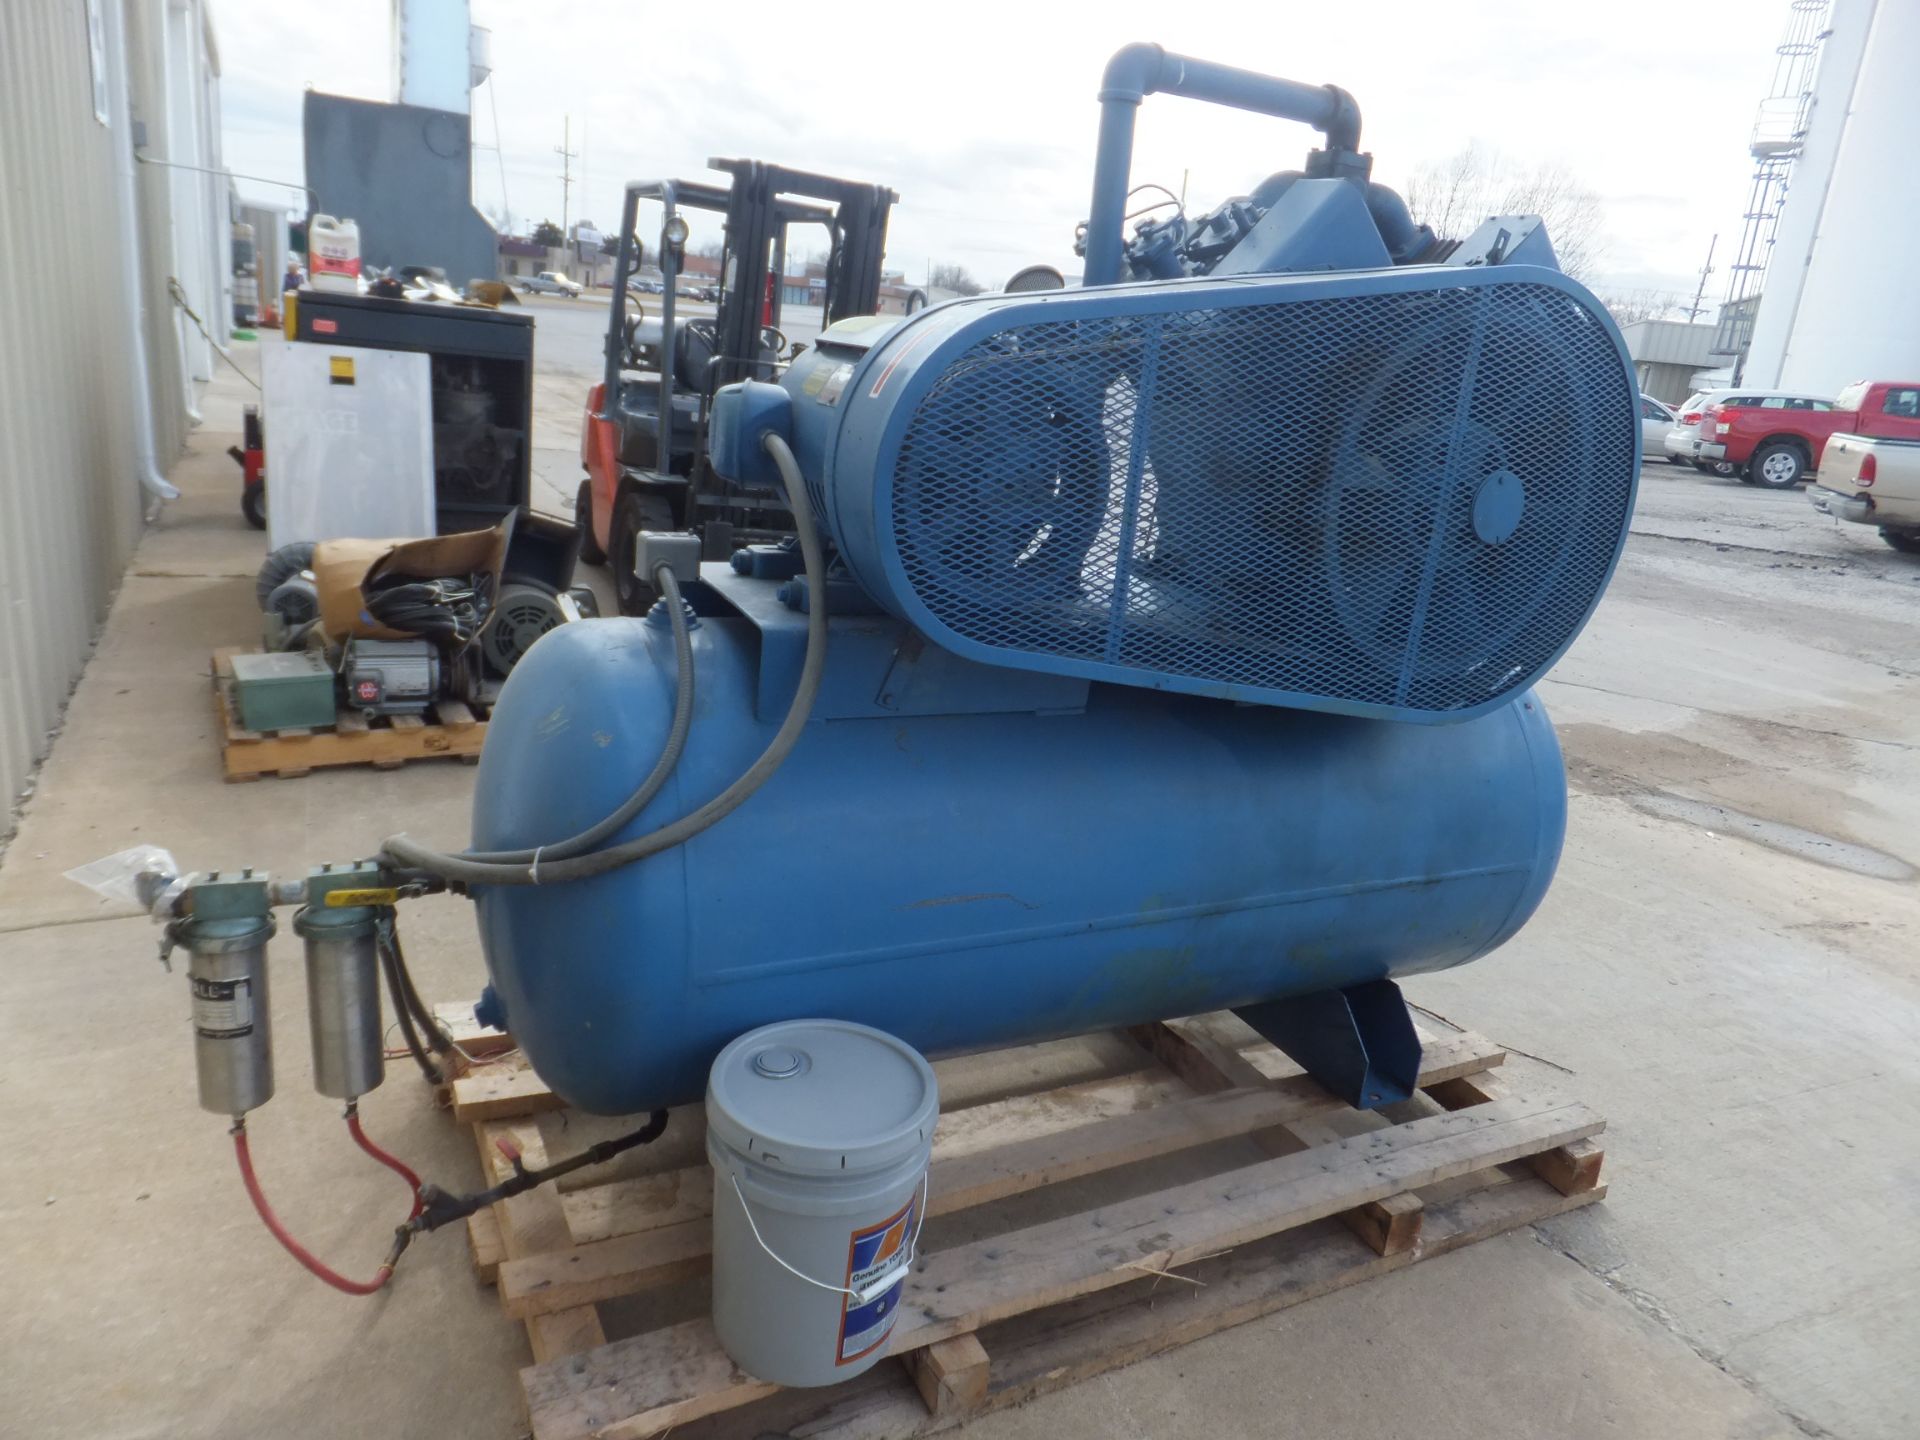 Quincy 25 Hp Reciprocating Air Compressor, Model 5120, S/N 160353 L, Size 6 & 3-1/4 x 4, Lincoln - Image 2 of 10